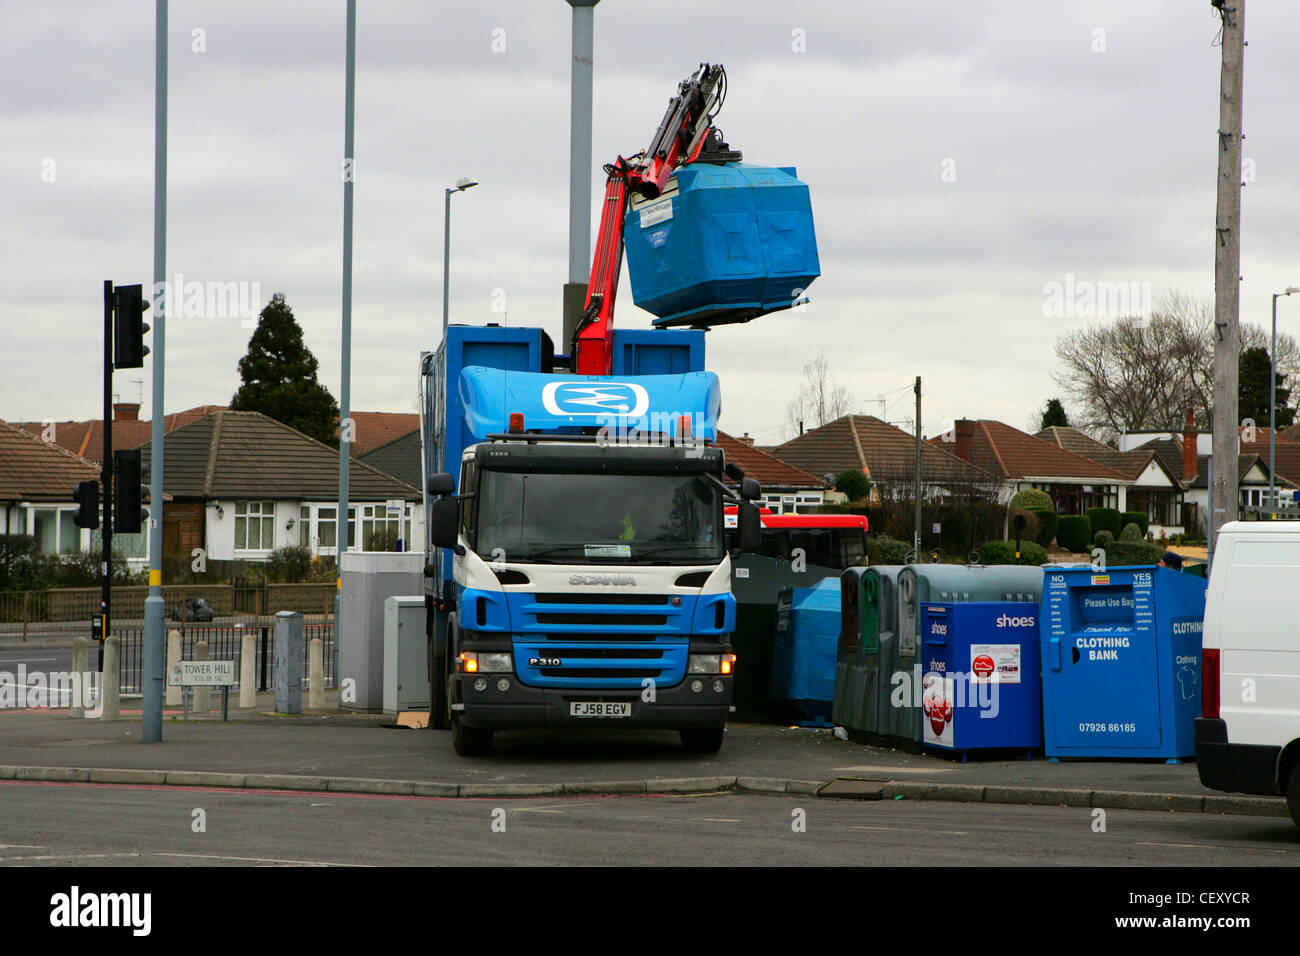 Smurfit Kappa lorry with crane and operator emtying paper recyling bin into  lorry in birmingham uk, feb 2012 Stock Photo - Alamy